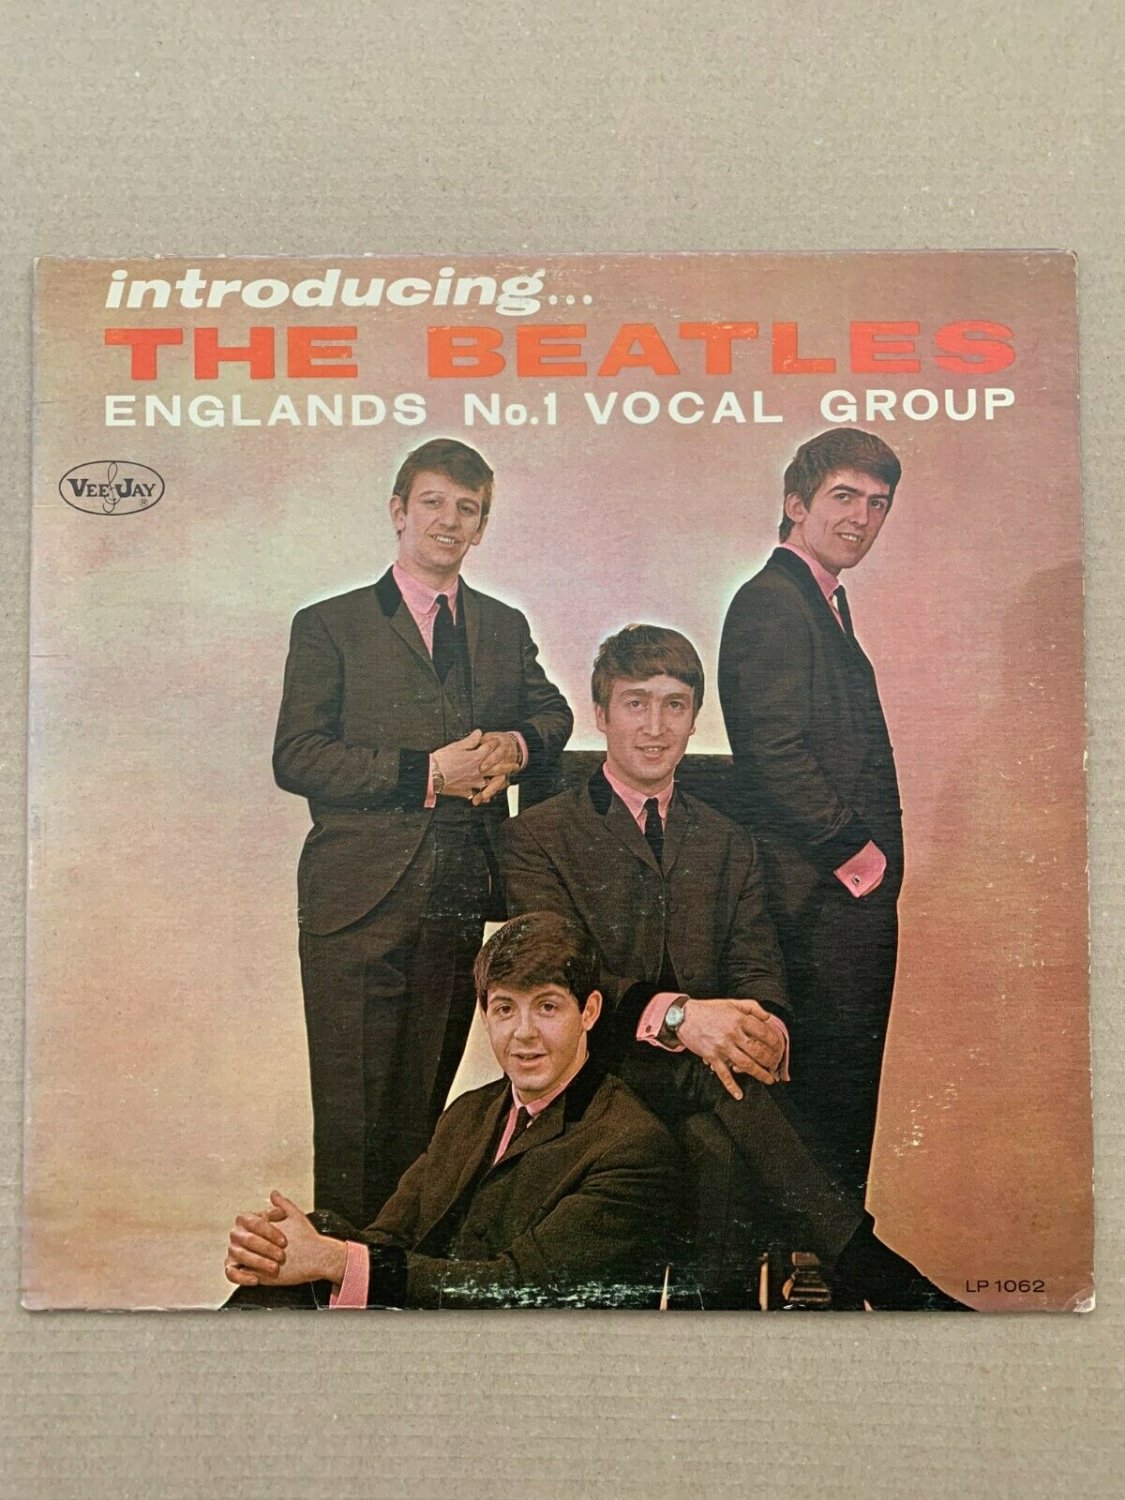 The Beatles - Introducing VJLP 1062, Monarch pressing, "45" size label, US, 1964